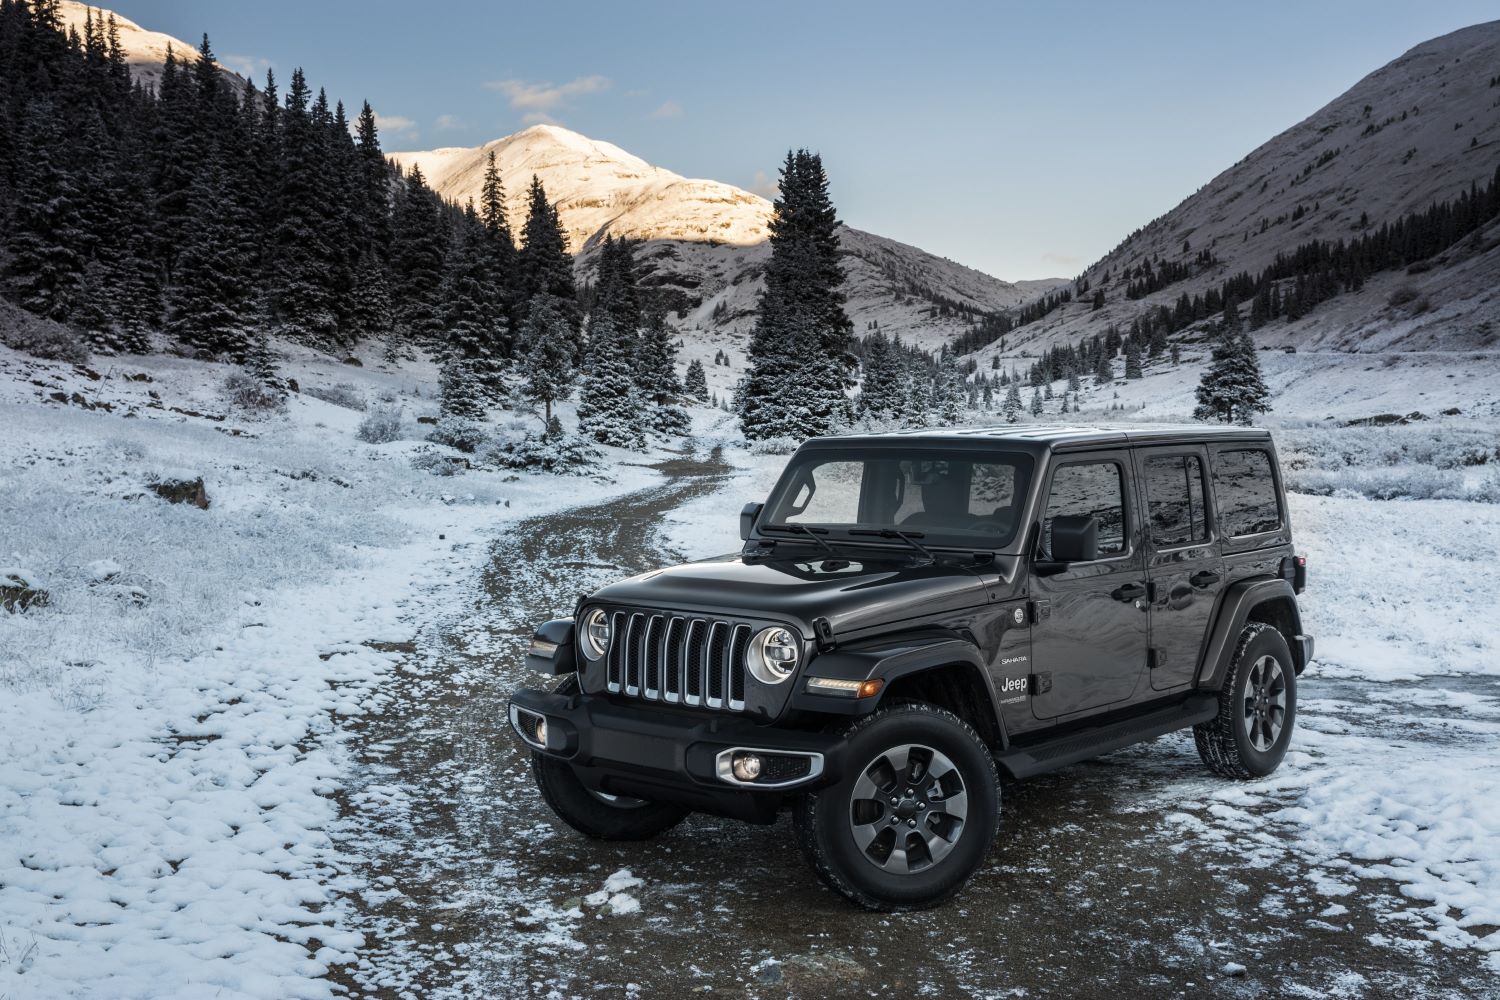 Jeep Wrangler Copies Ford Bronco With New Doors-Off Mirror Kit